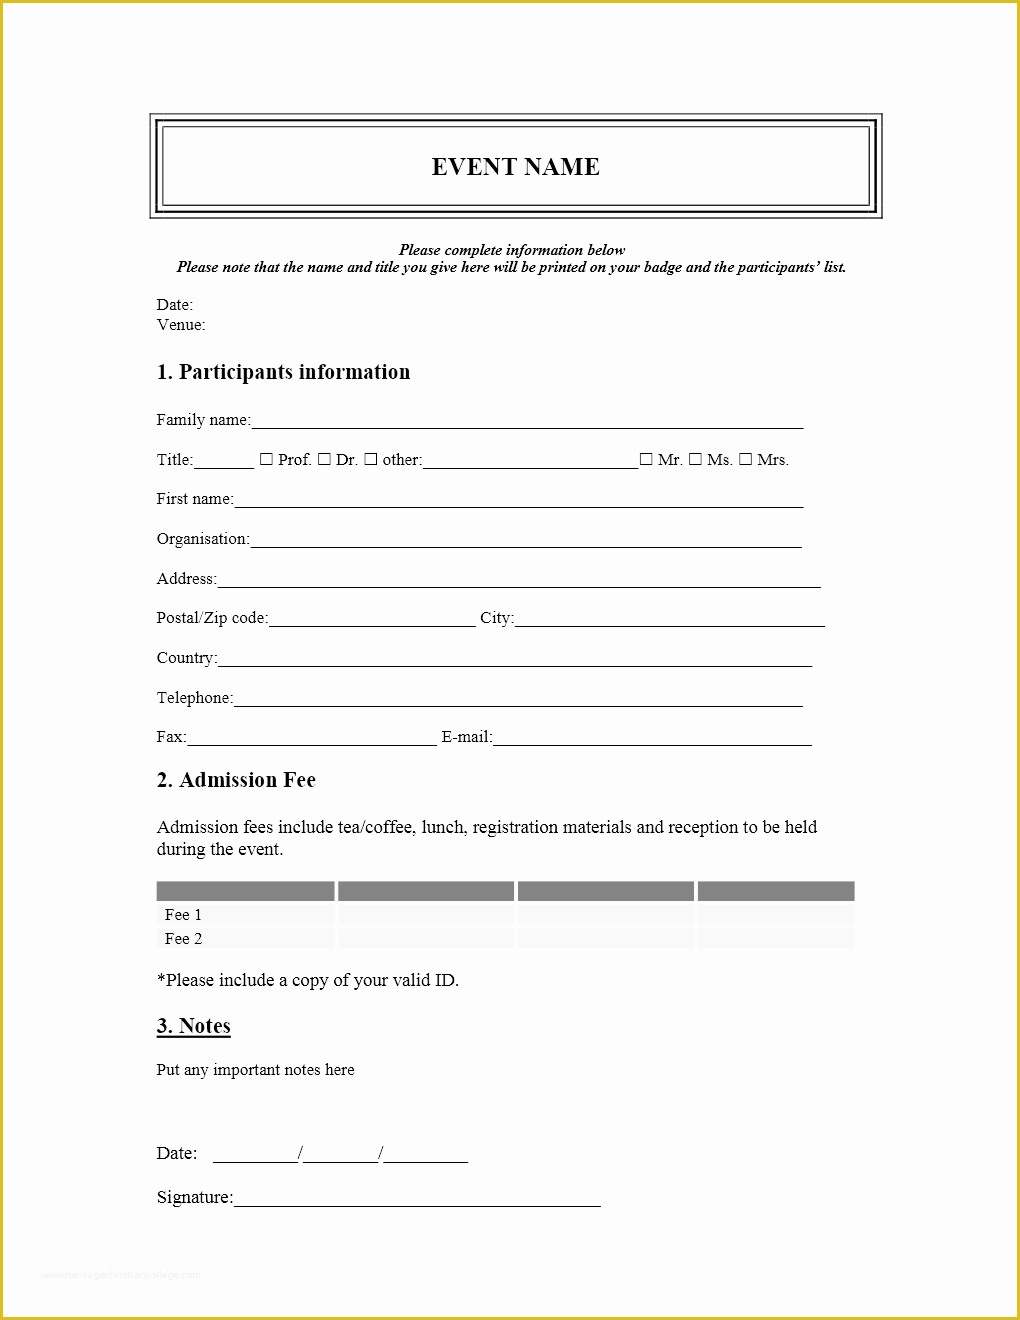 registration-form-template-word-free-download-of-oxbridge-academy